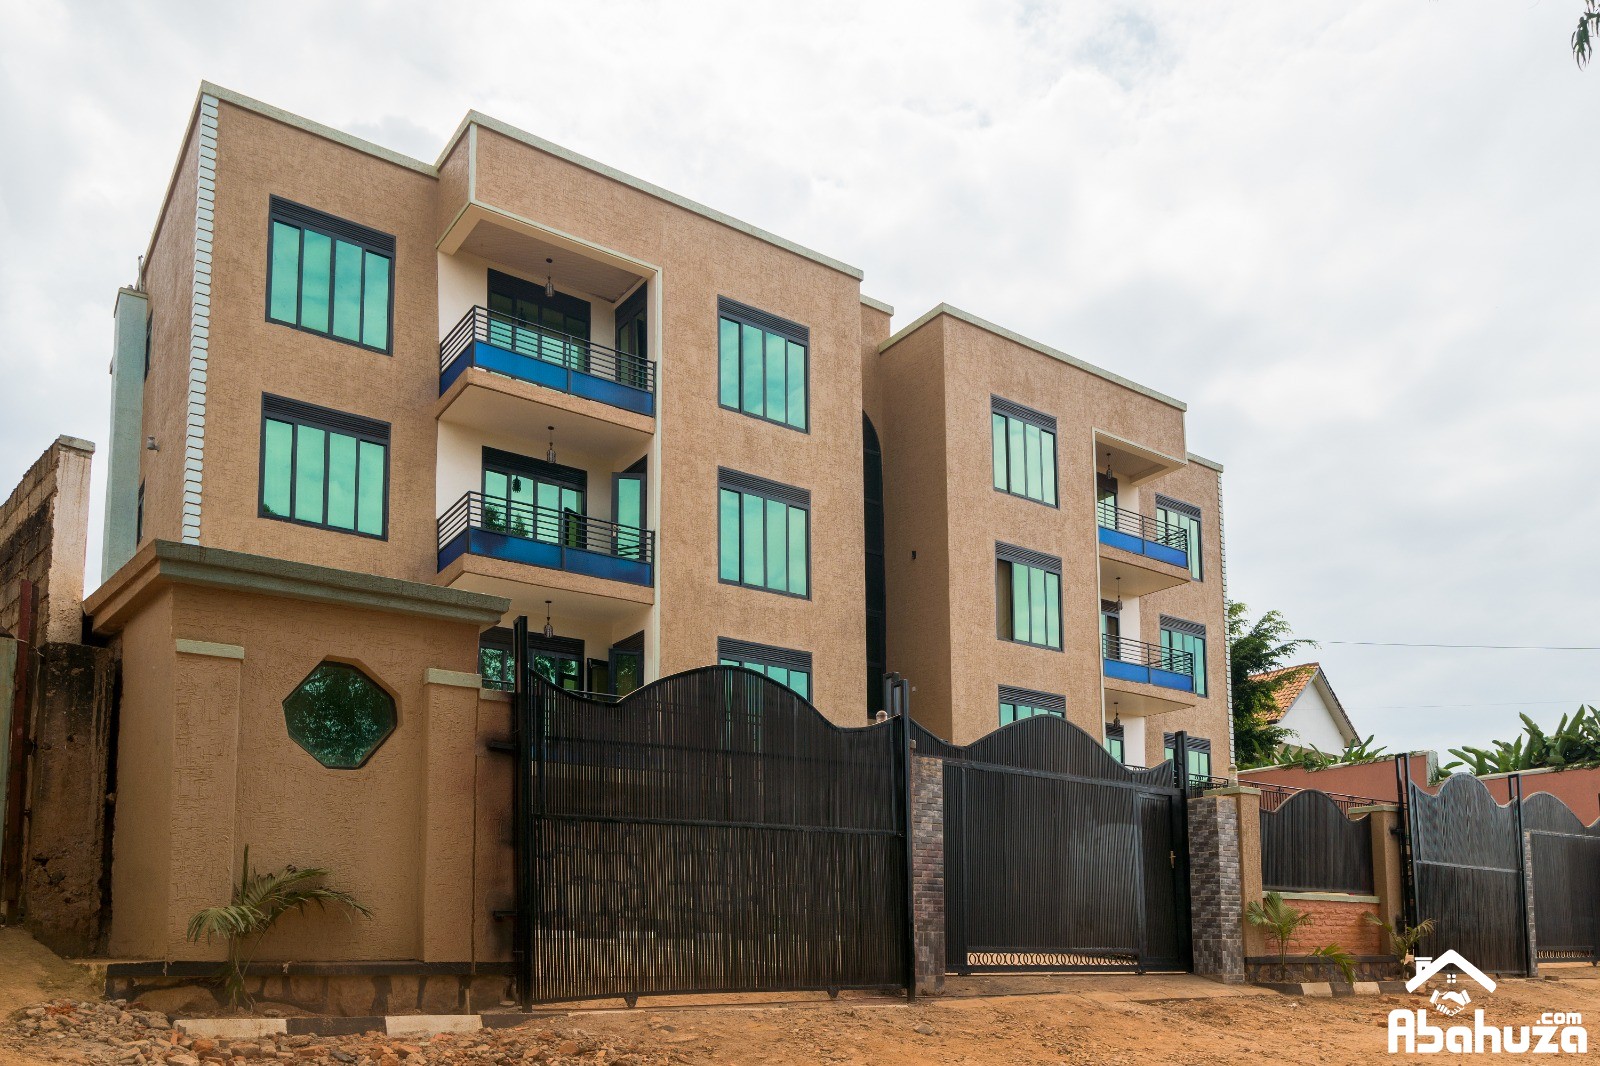 A COMFY FURNISHED 3 BEDROOM APARTMENT FOR RENT IN GISOZI